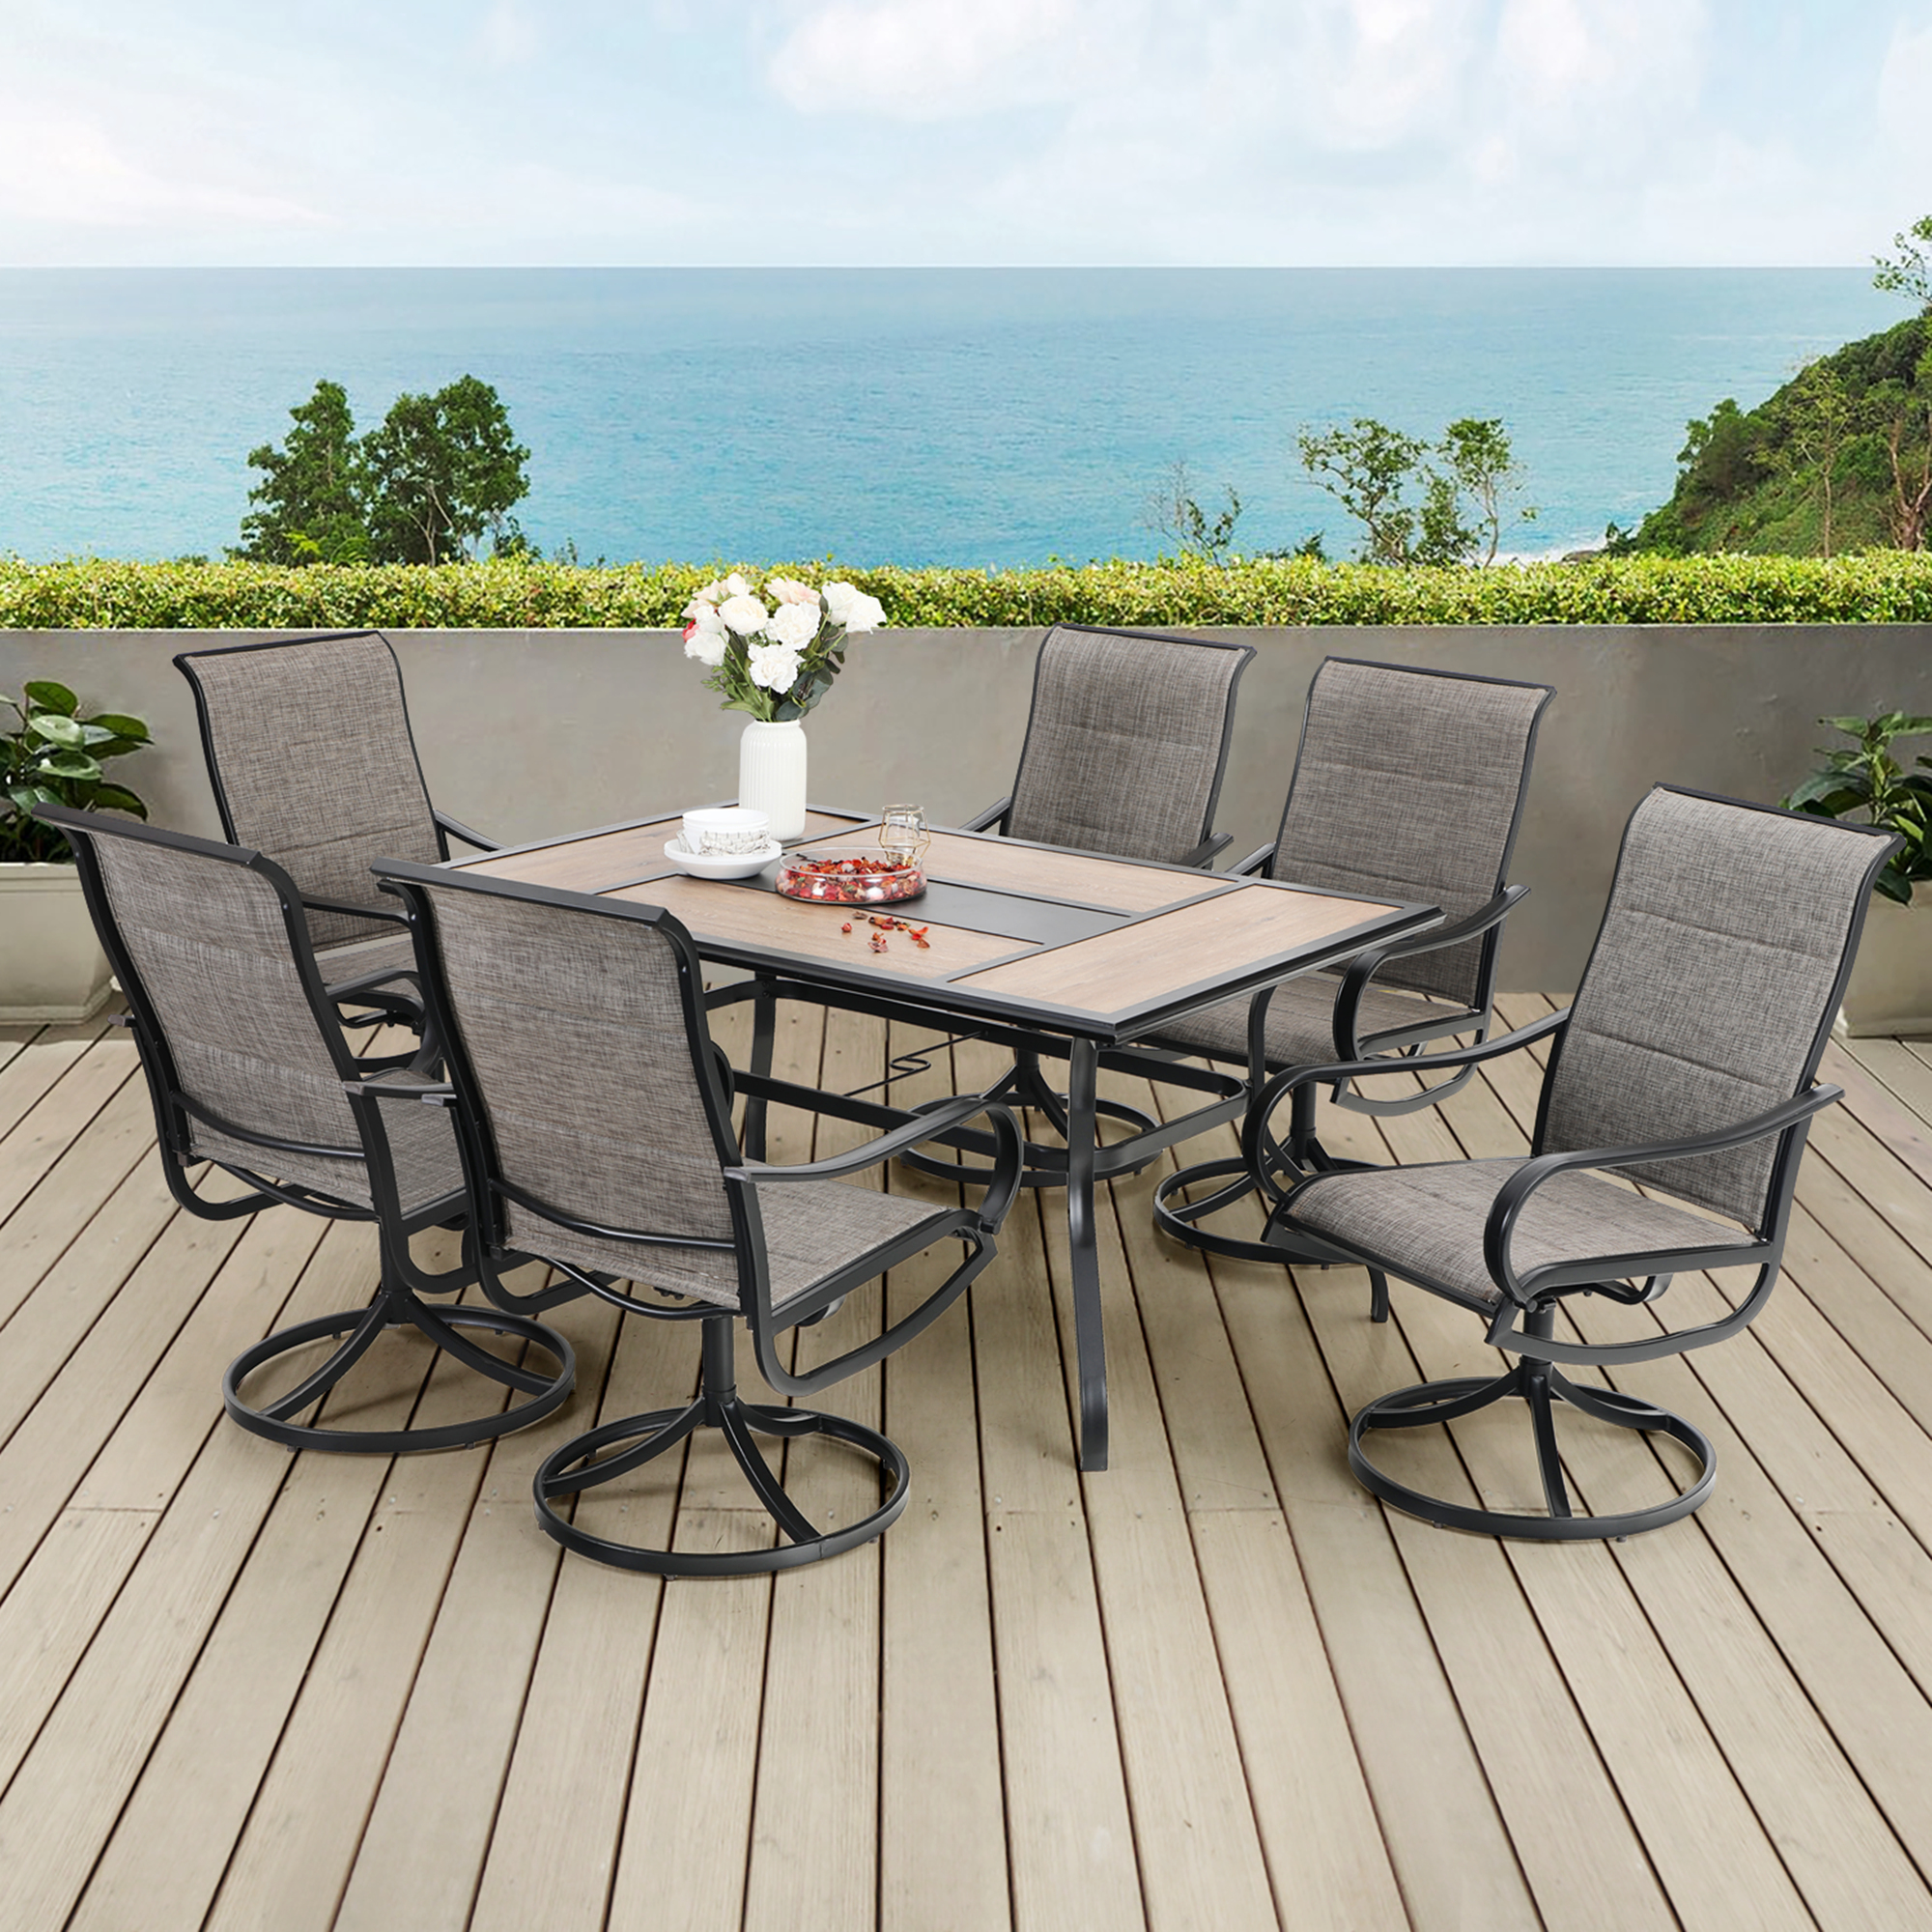 MF Studio 7-Piece Outdoor Patio Dining Sets Modern Metal Furniture with 6 Swivel Dining Chairs and 1 Piece Rectangular Table, Gray - image 3 of 24